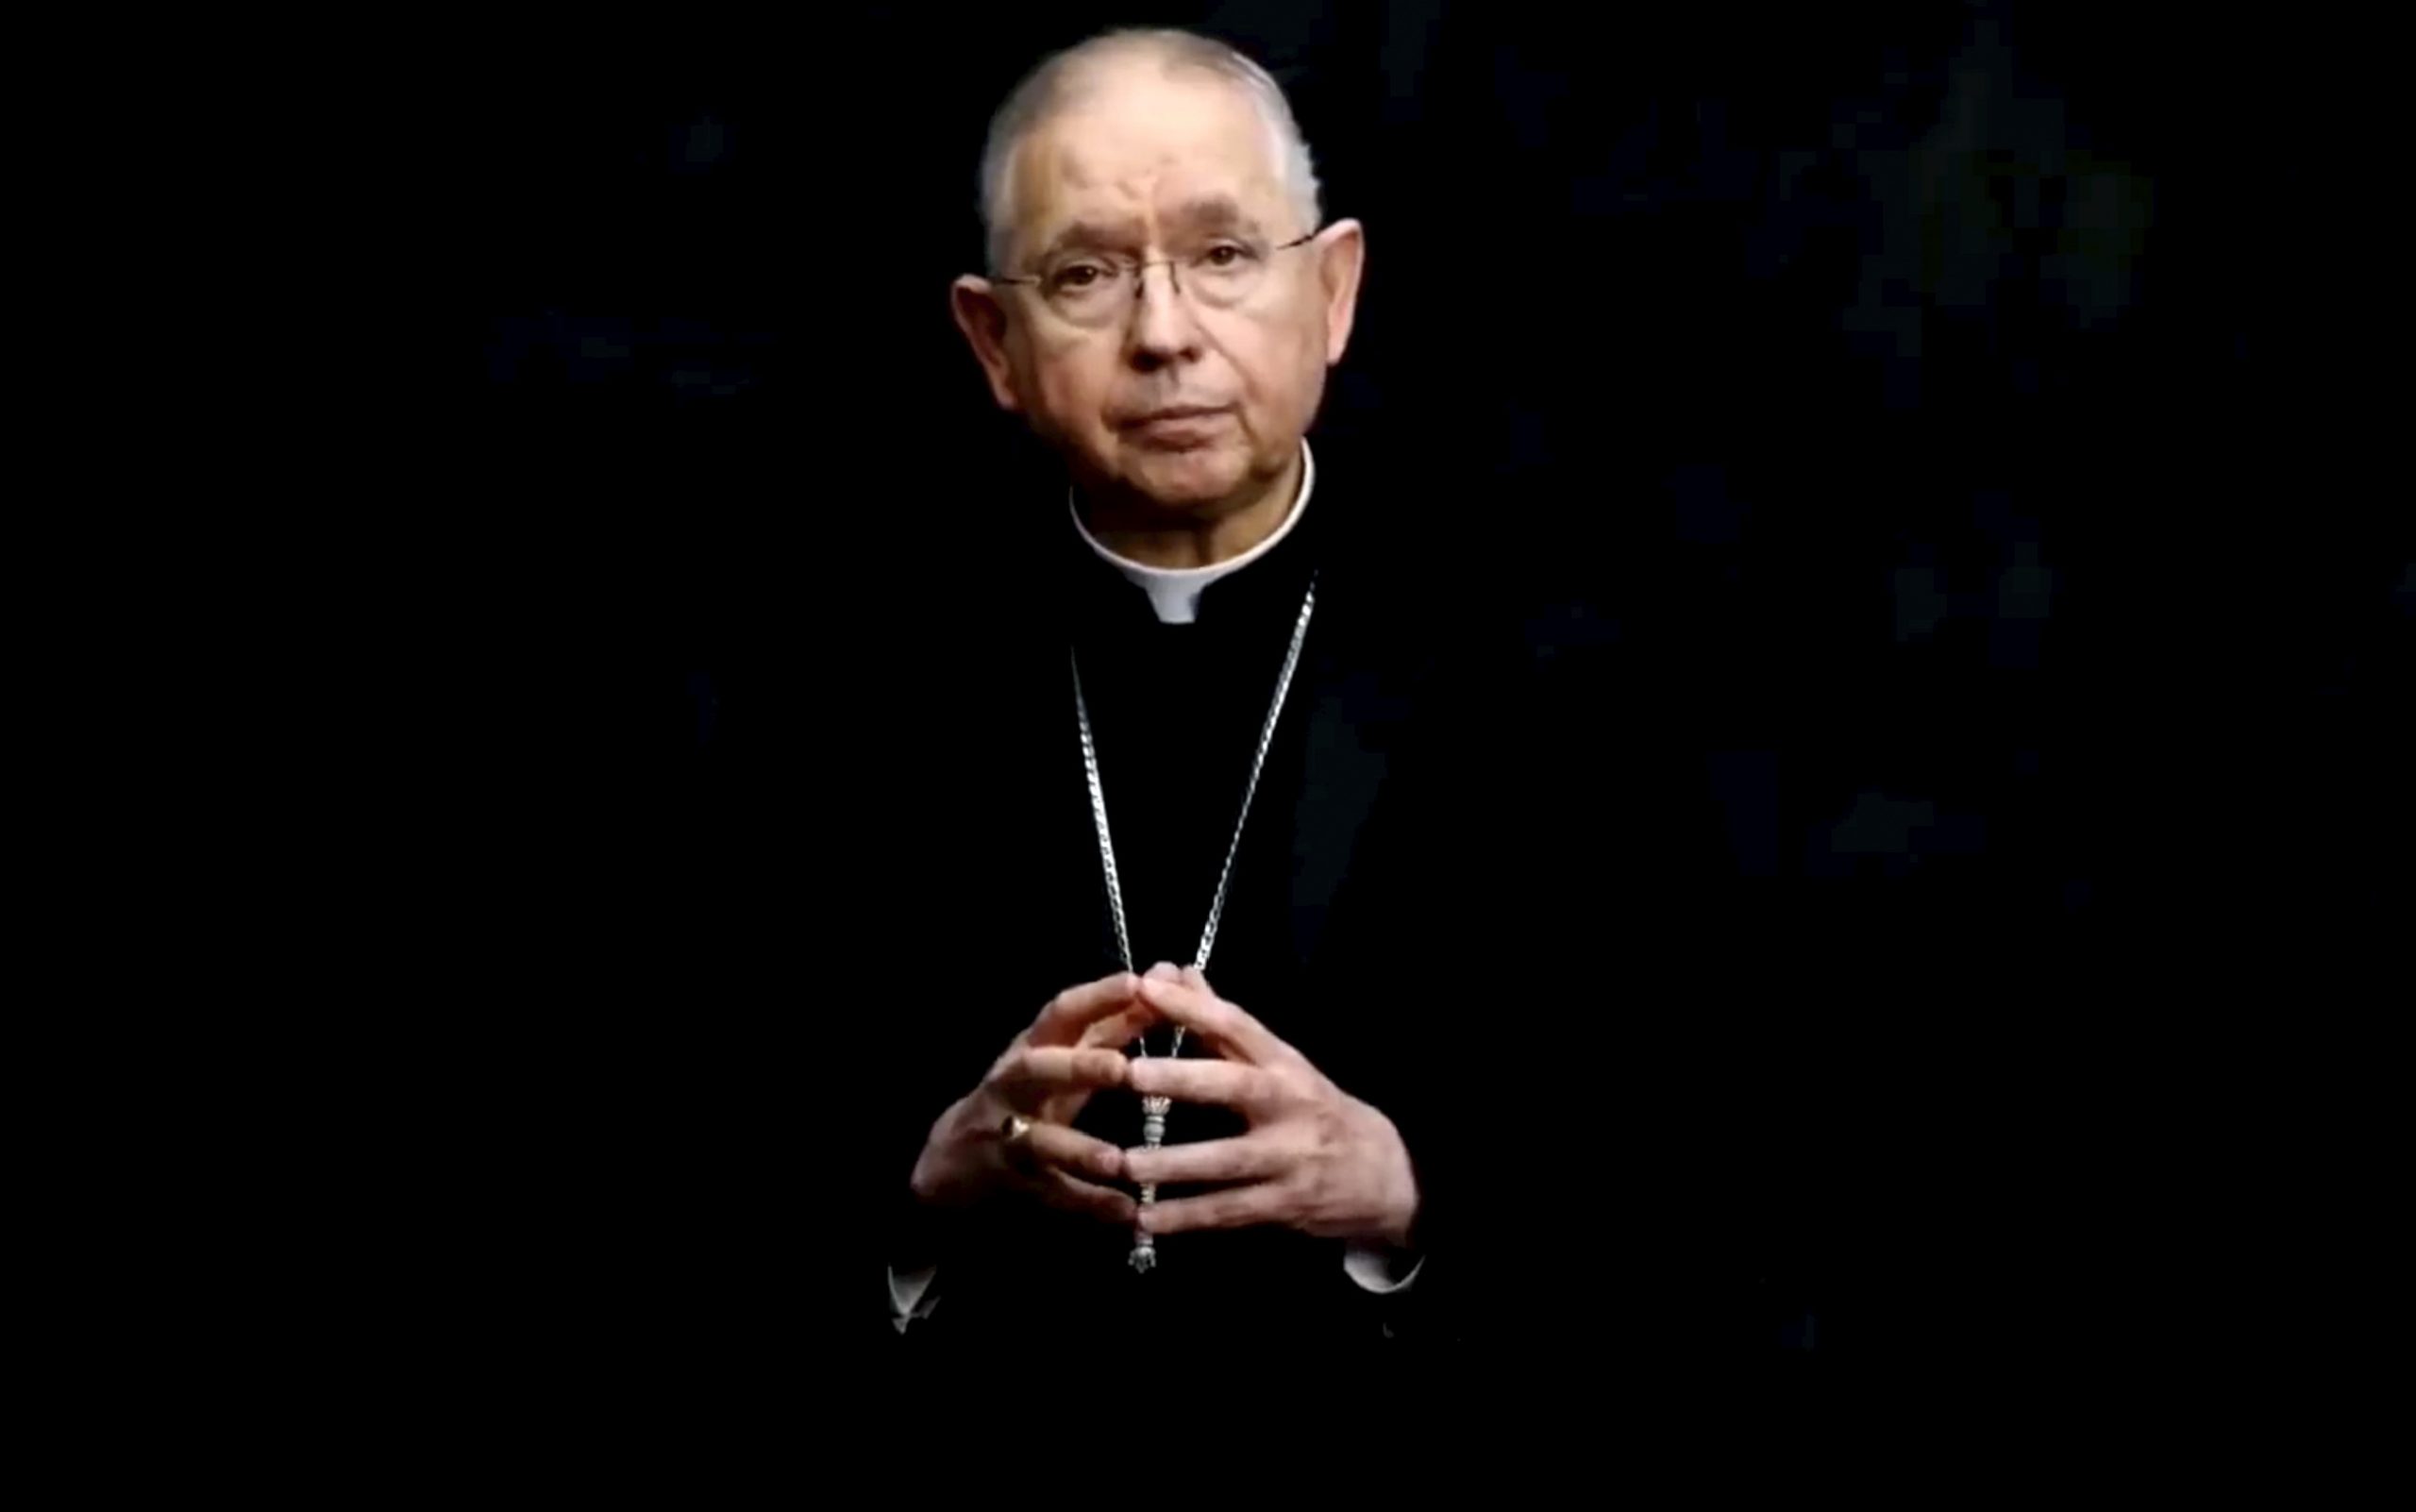 In this image taken from video, Archbishop José Gomez of Los Angeles, president of the U.S. Conference of Catholic Bishops, addresses the body's virtual assembly on June 16, 2021. (United States Conference of Catholic Bishops via AP)